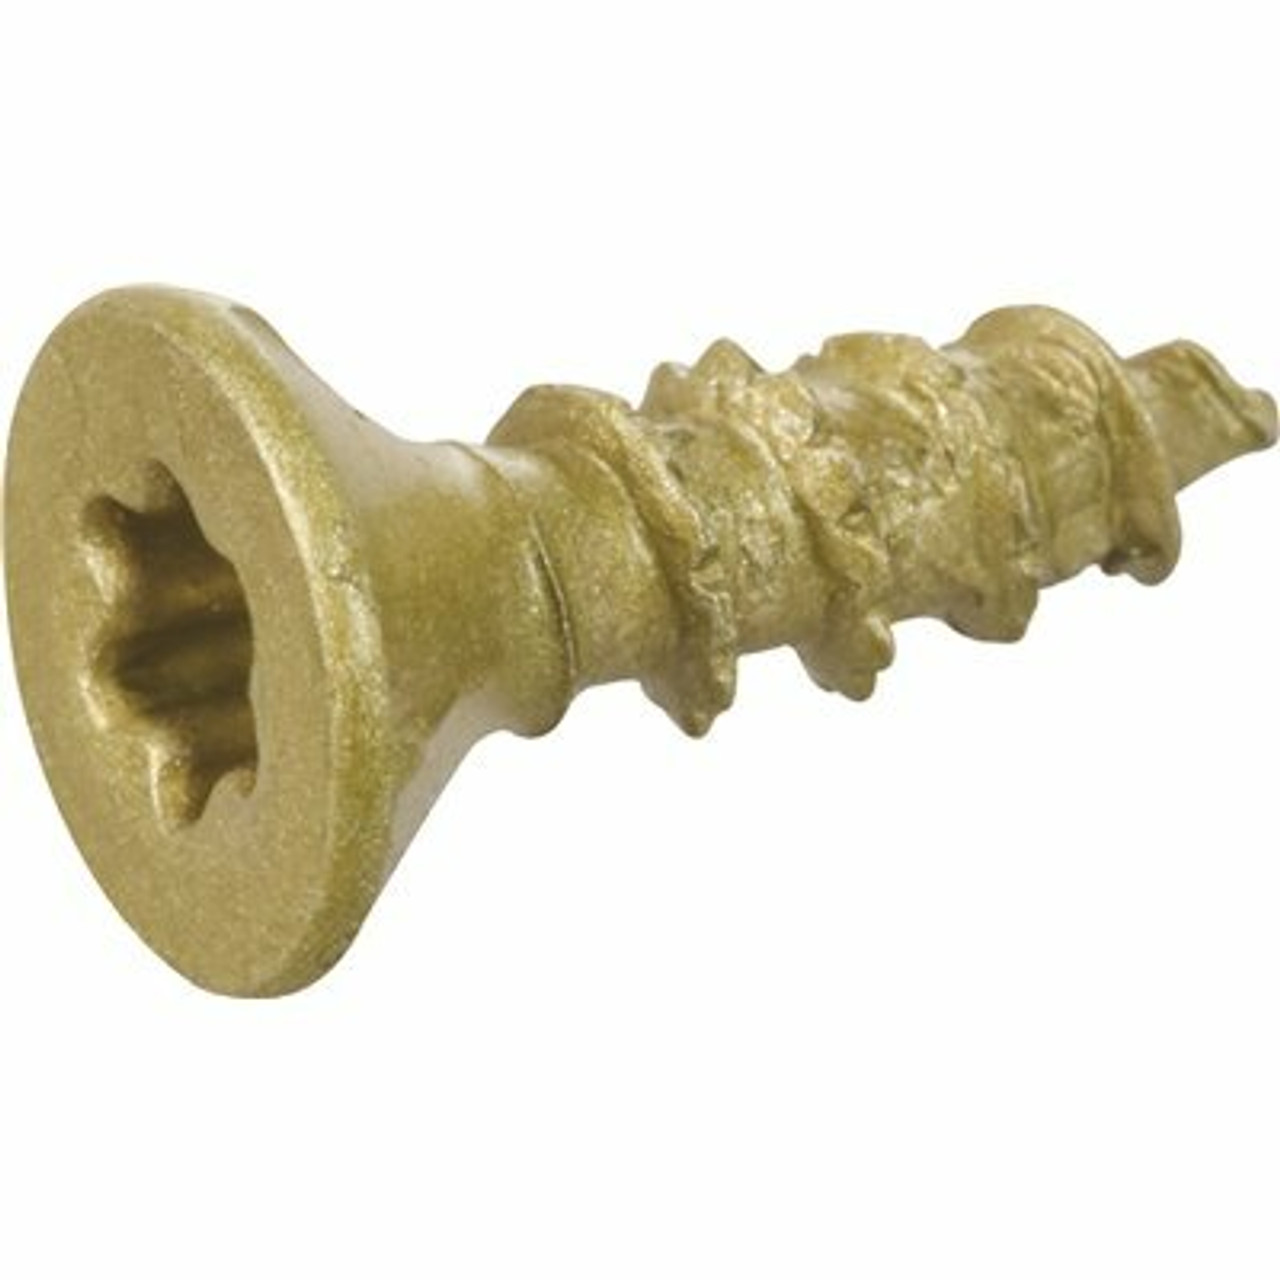 #6 X 1/2 In. Star Drive Flat Head Multi-Material Screw Exterior Bronze-Plated (25-Pack)